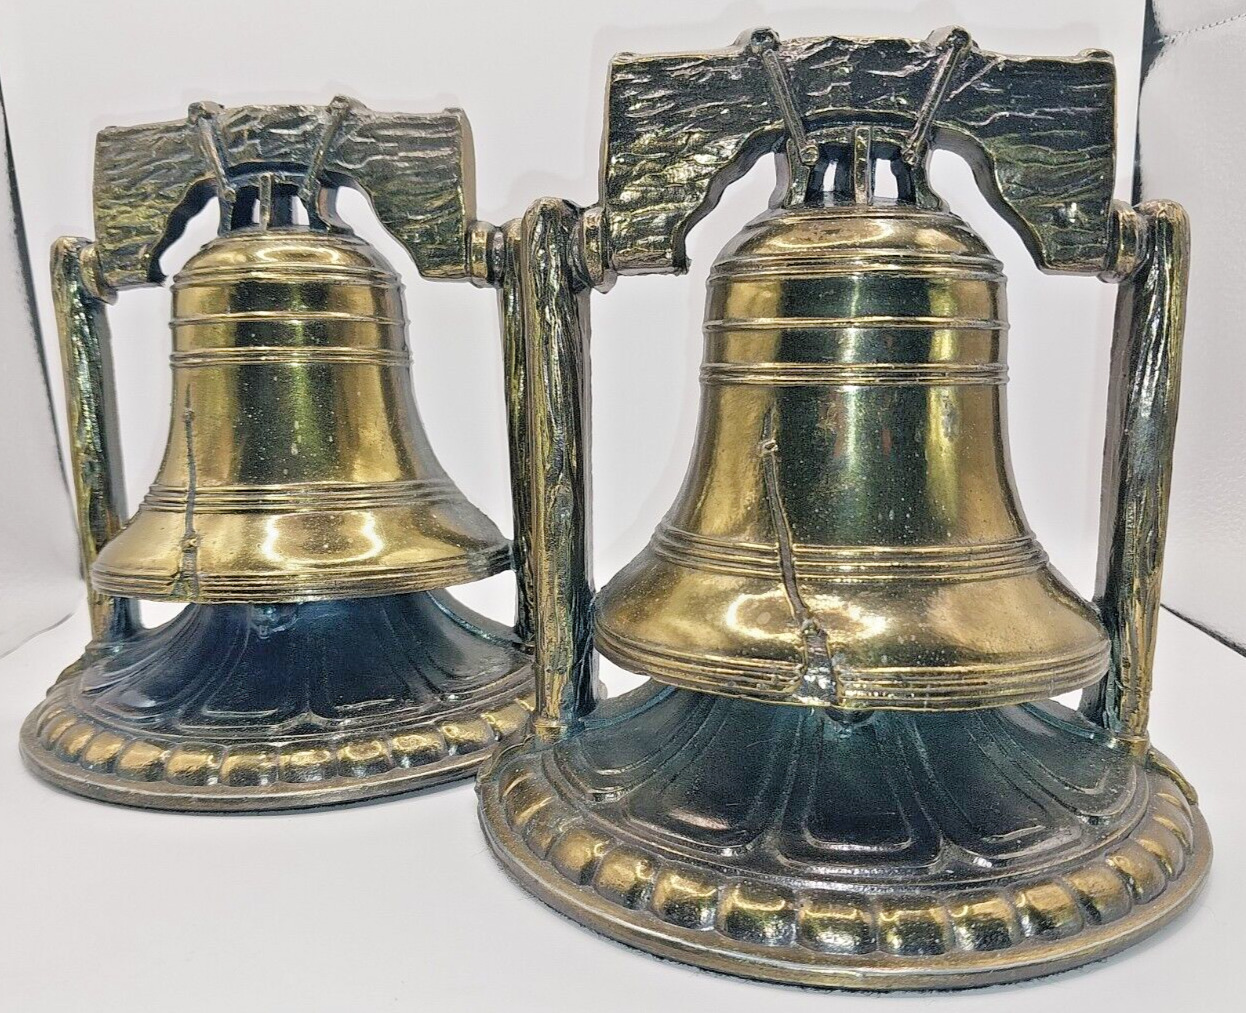 Vintage 1974 brass Liberty bell bookends